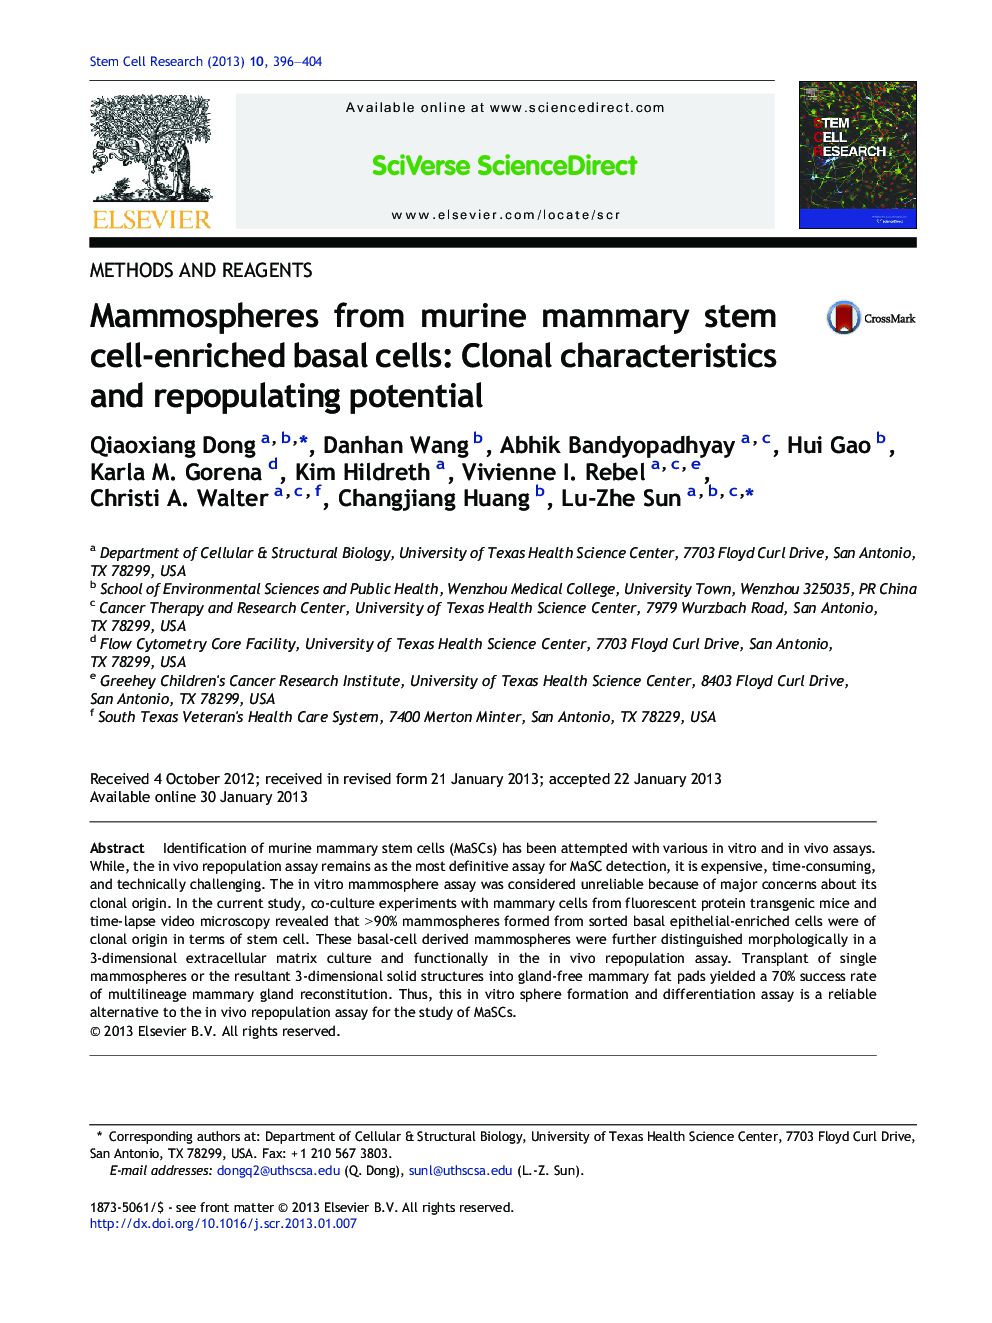 Mammospheres from murine mammary stem cell-enriched basal cells: Clonal characteristics and repopulating potential